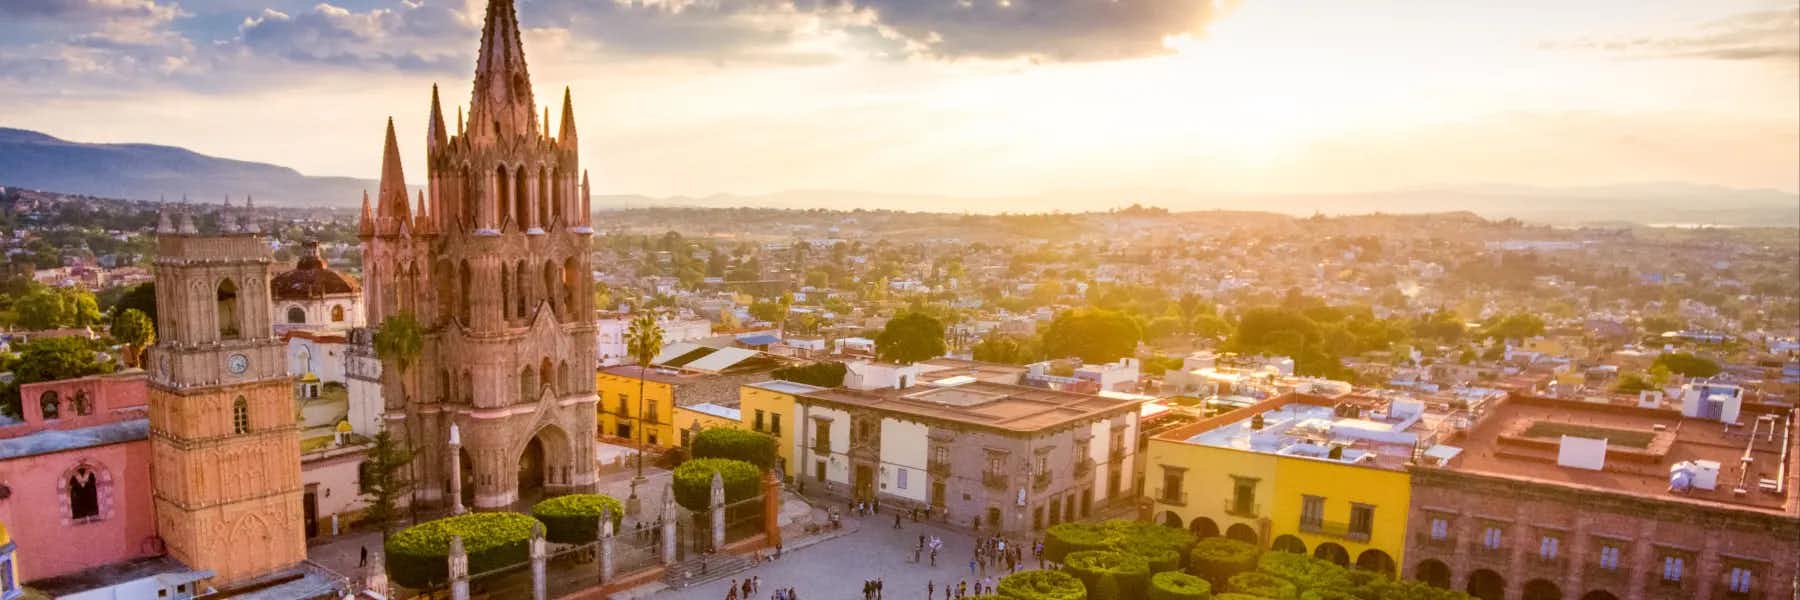 5 Safest Places to Live in Mexico…and 3 to Avoid 